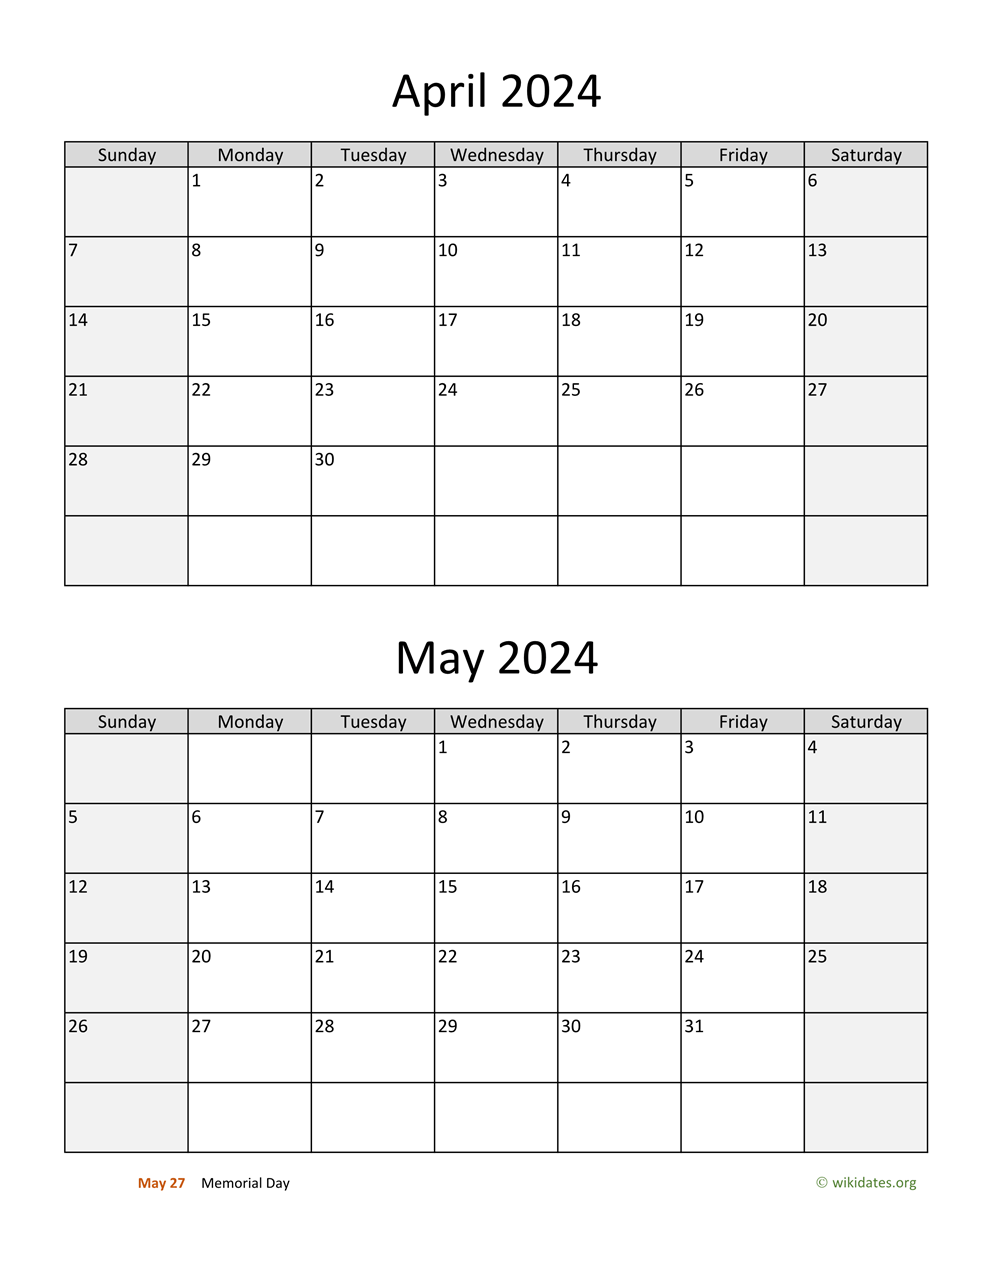 April And May 2024 Calendar | Wikidates for Printable Calendar April And May 2024